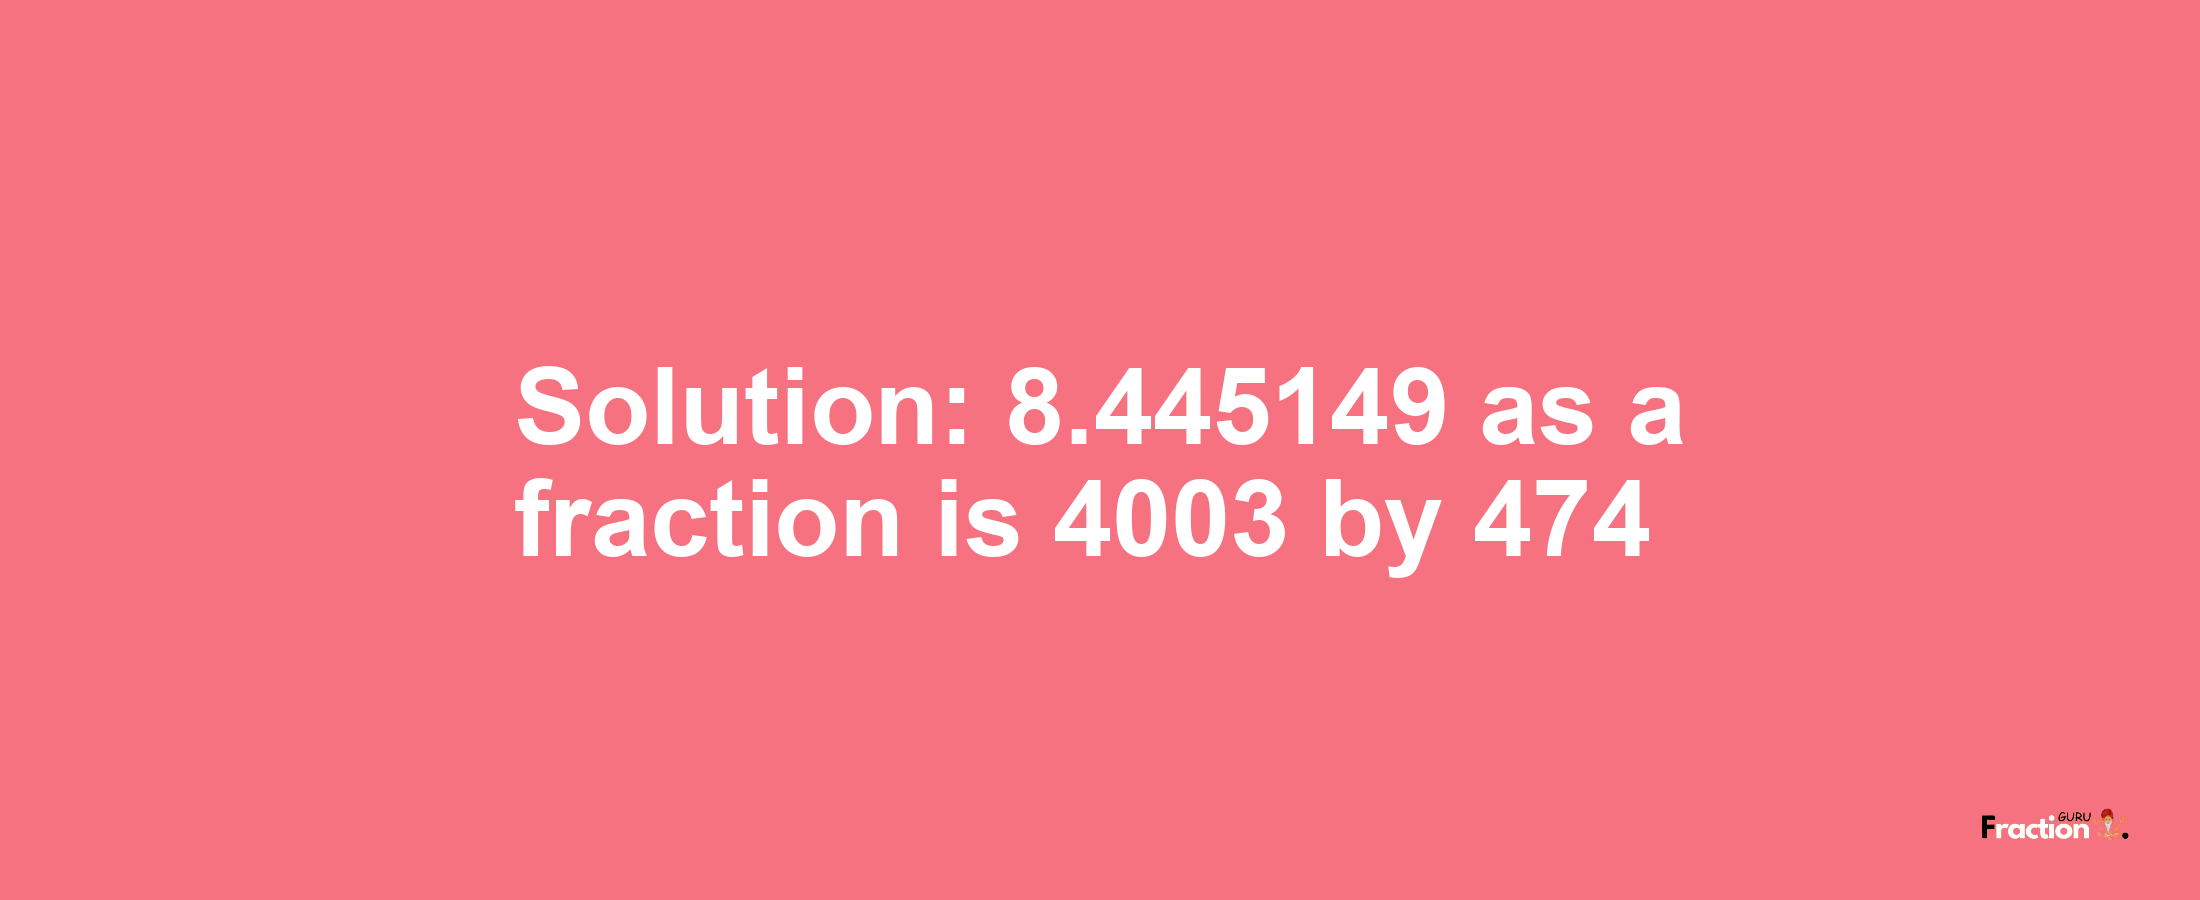 Solution:8.445149 as a fraction is 4003/474